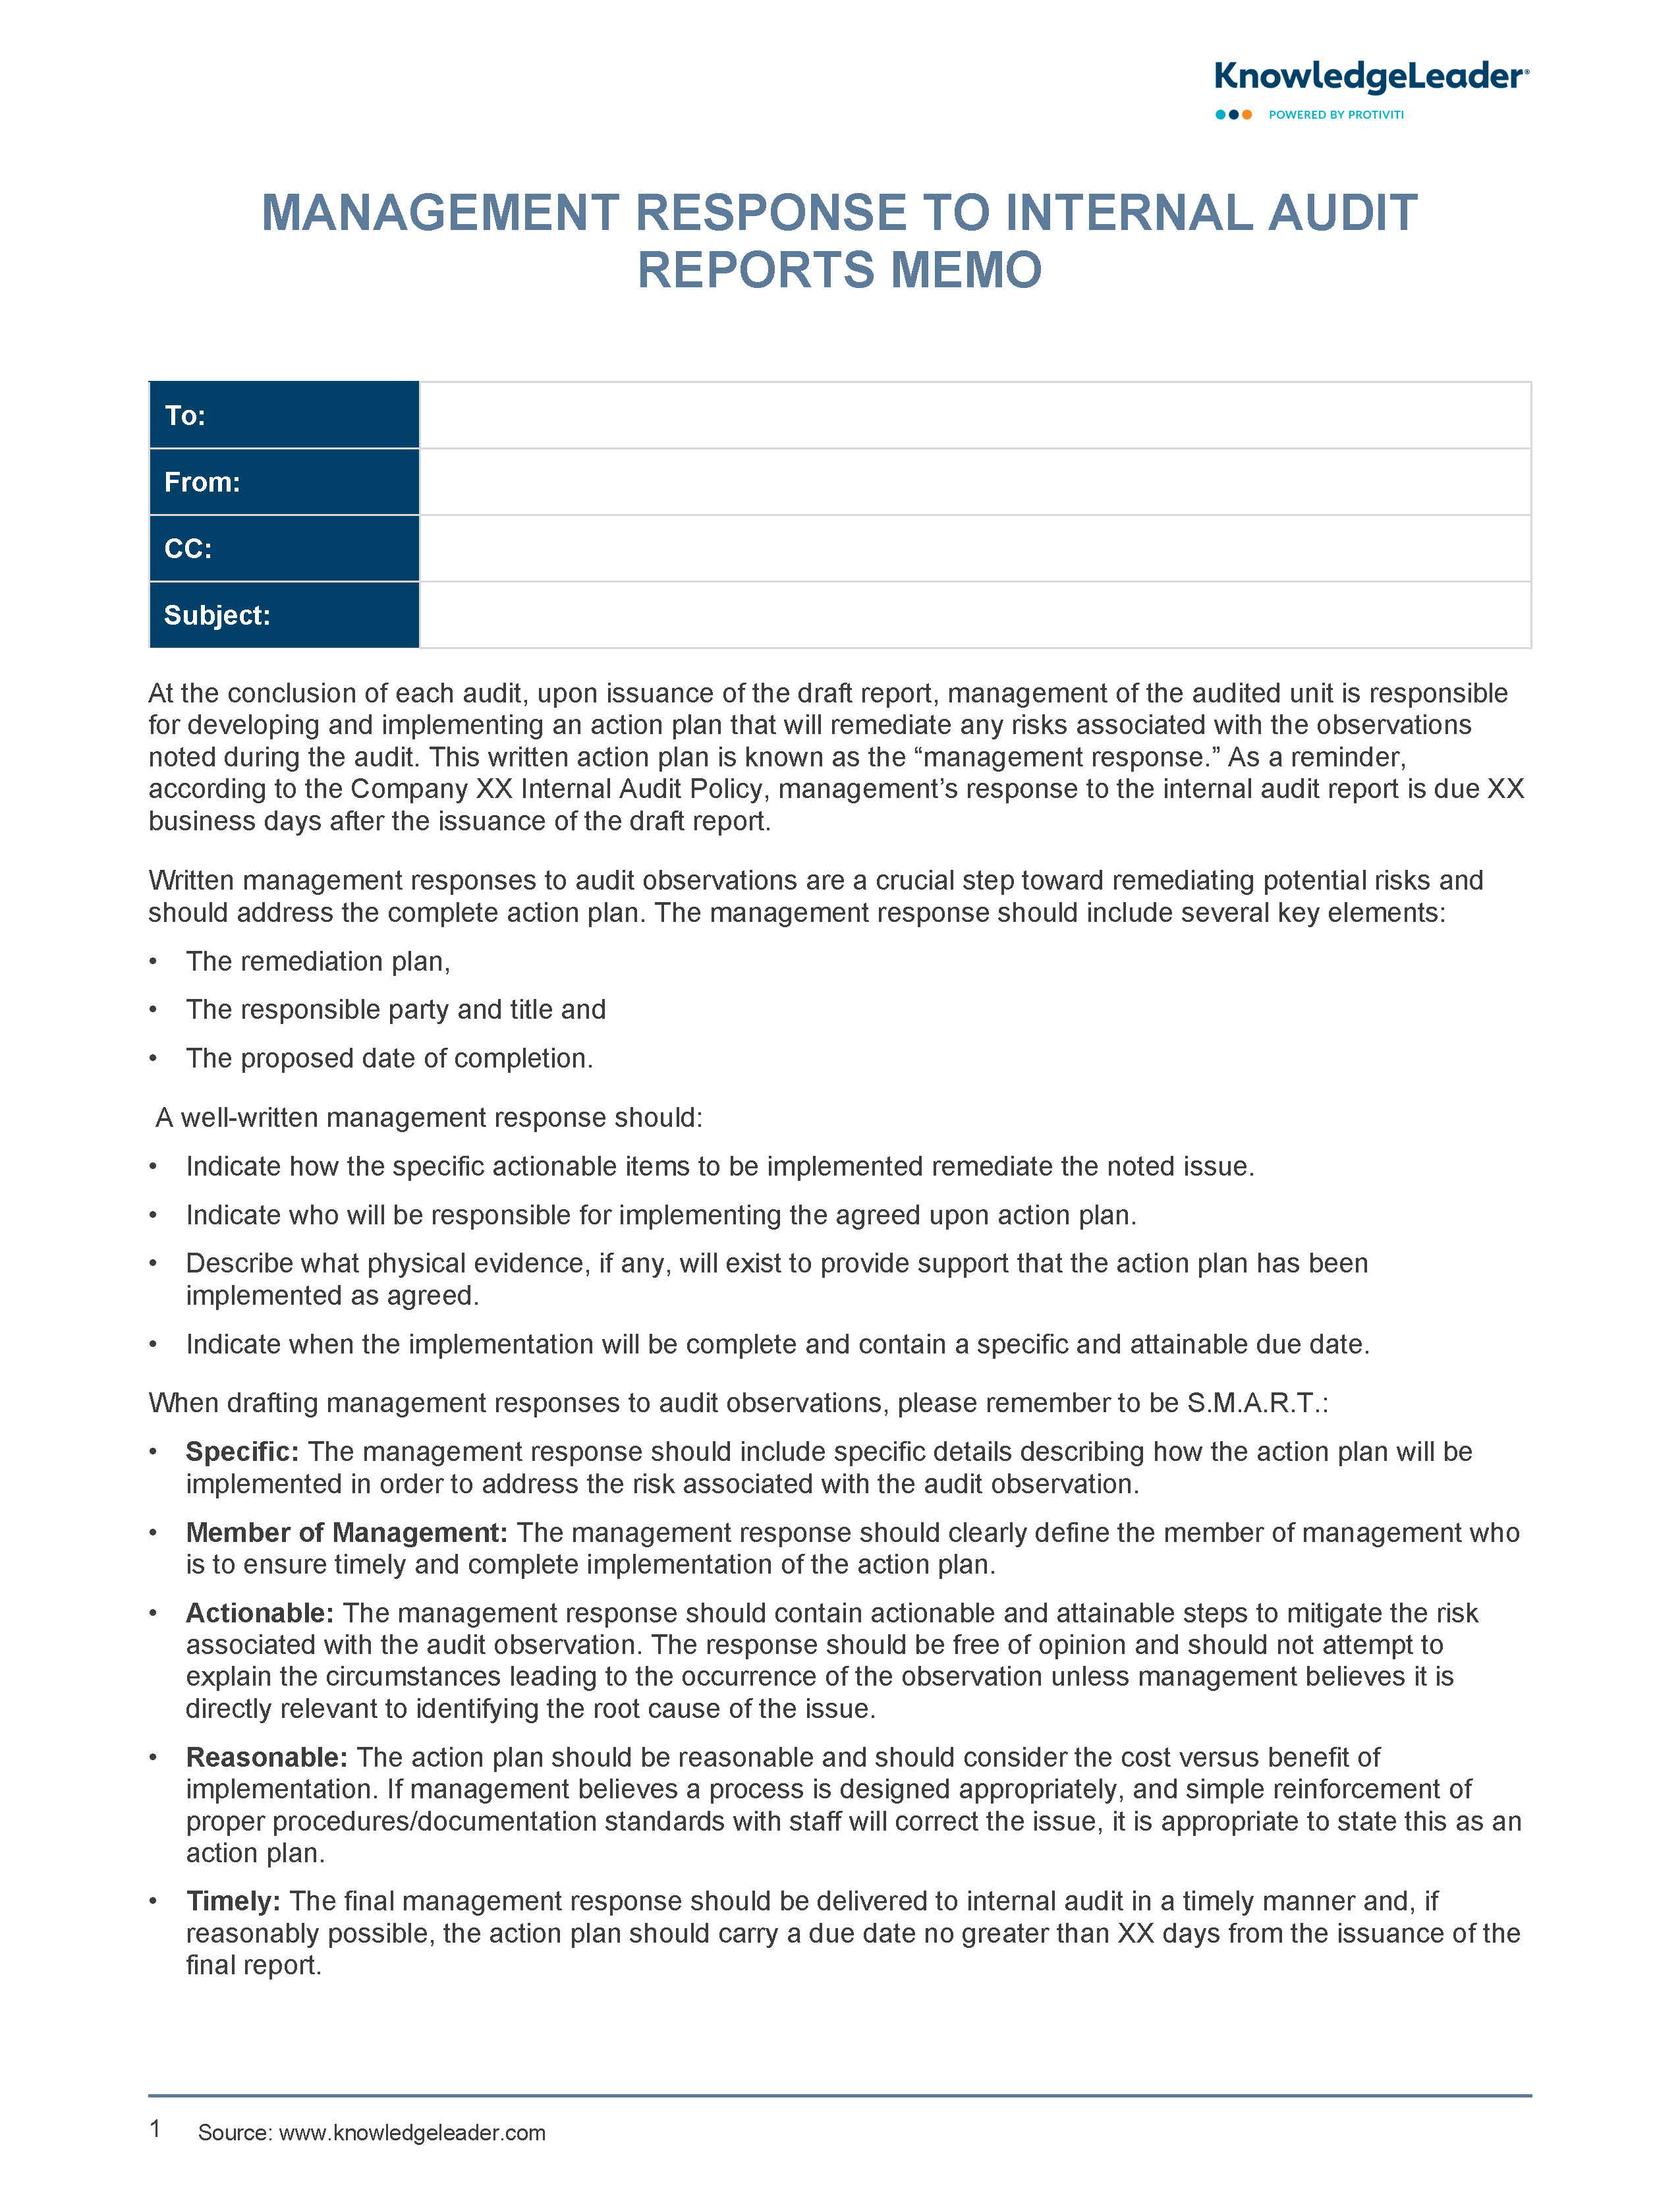 Screenshot of the first page of Management Response to Internal Audit Reports Memo